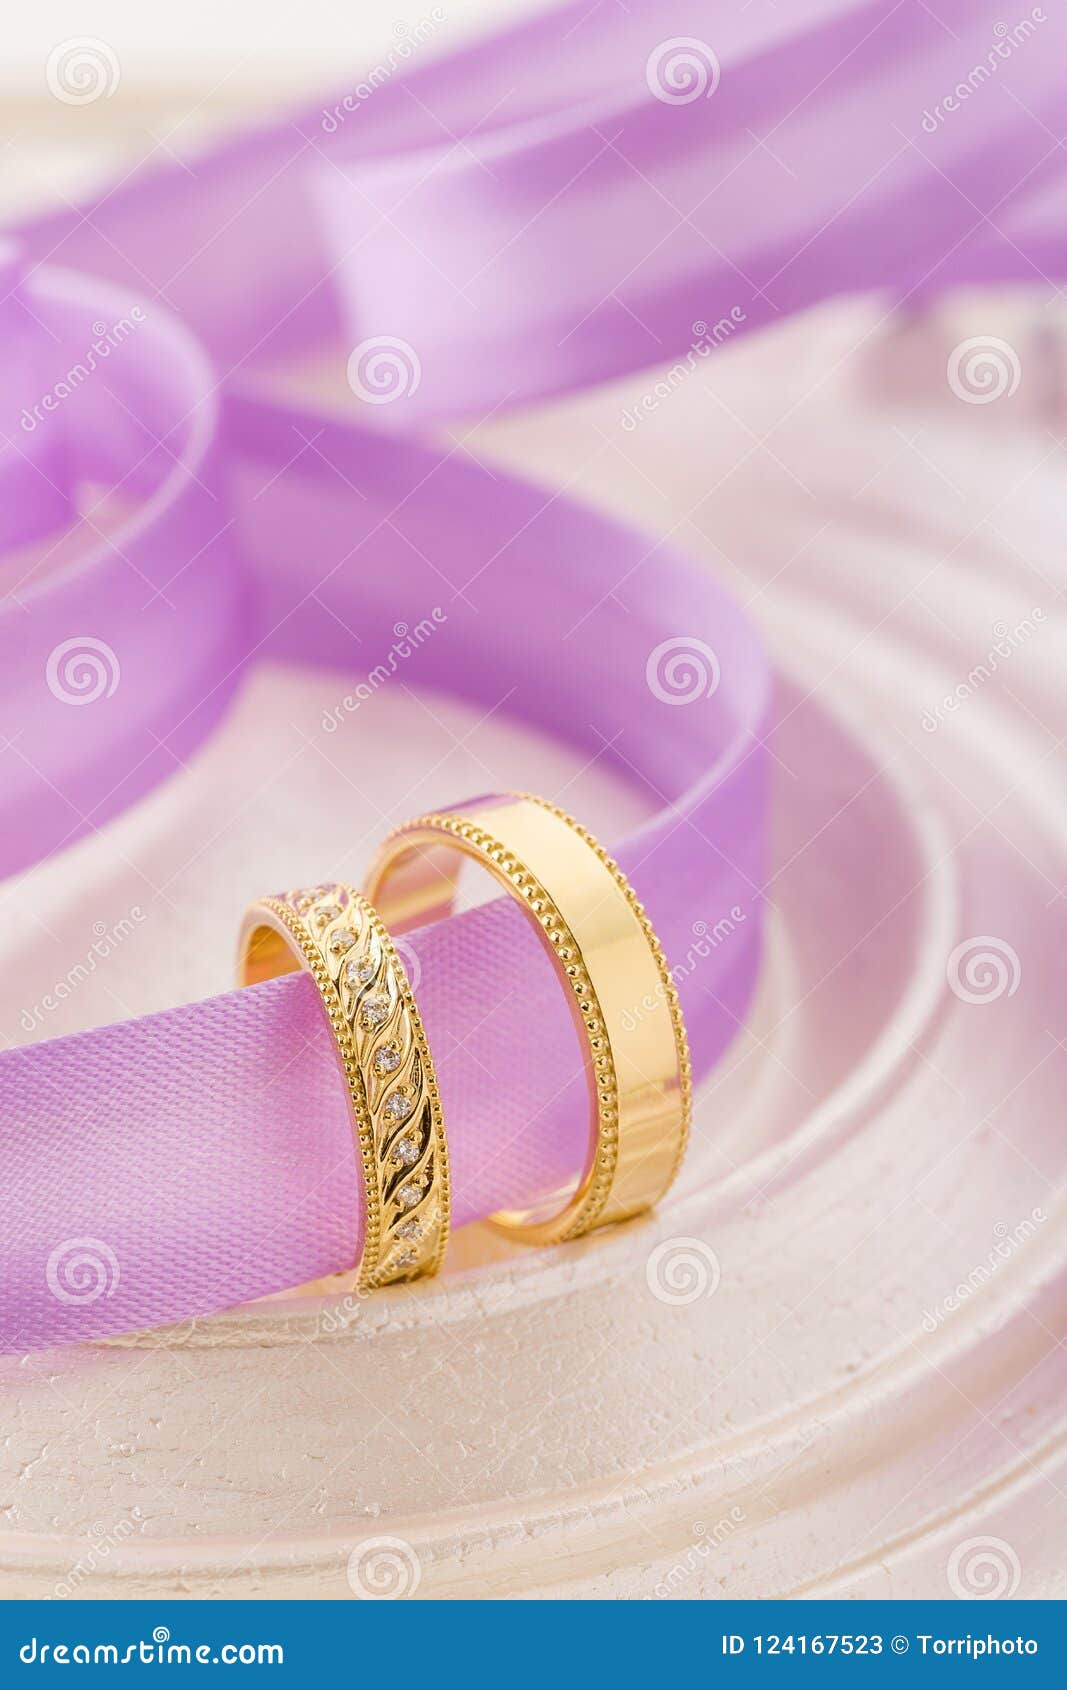 Two Gold Wedding Rings On Purple Ribbon Background Stock